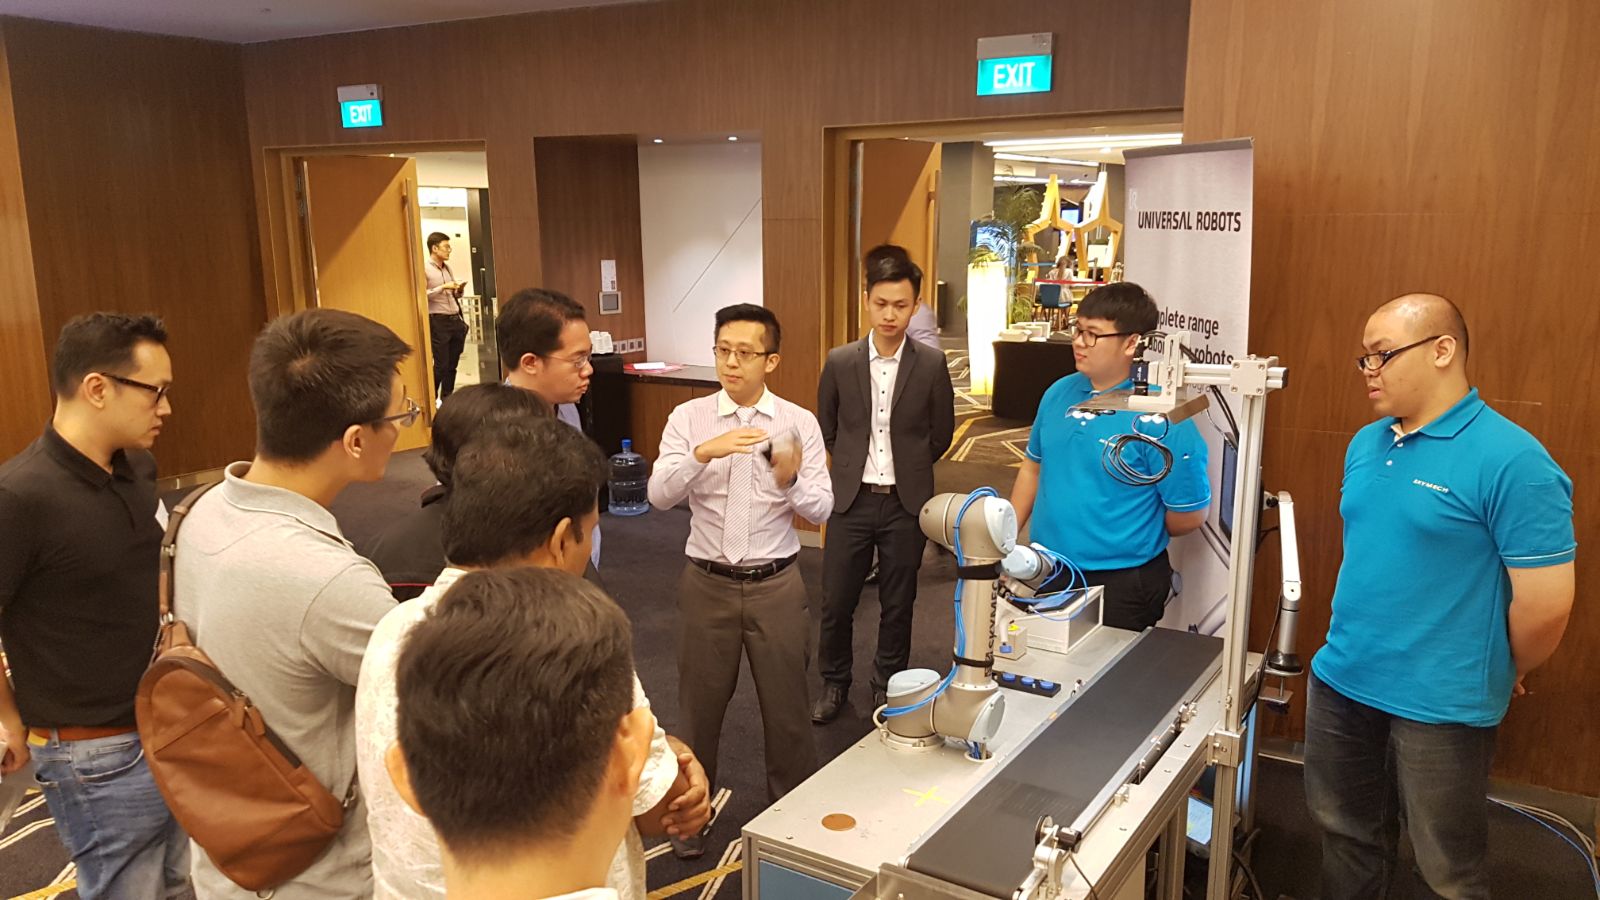 Live demonstration of 3D printing suction end-of-arm-tooling